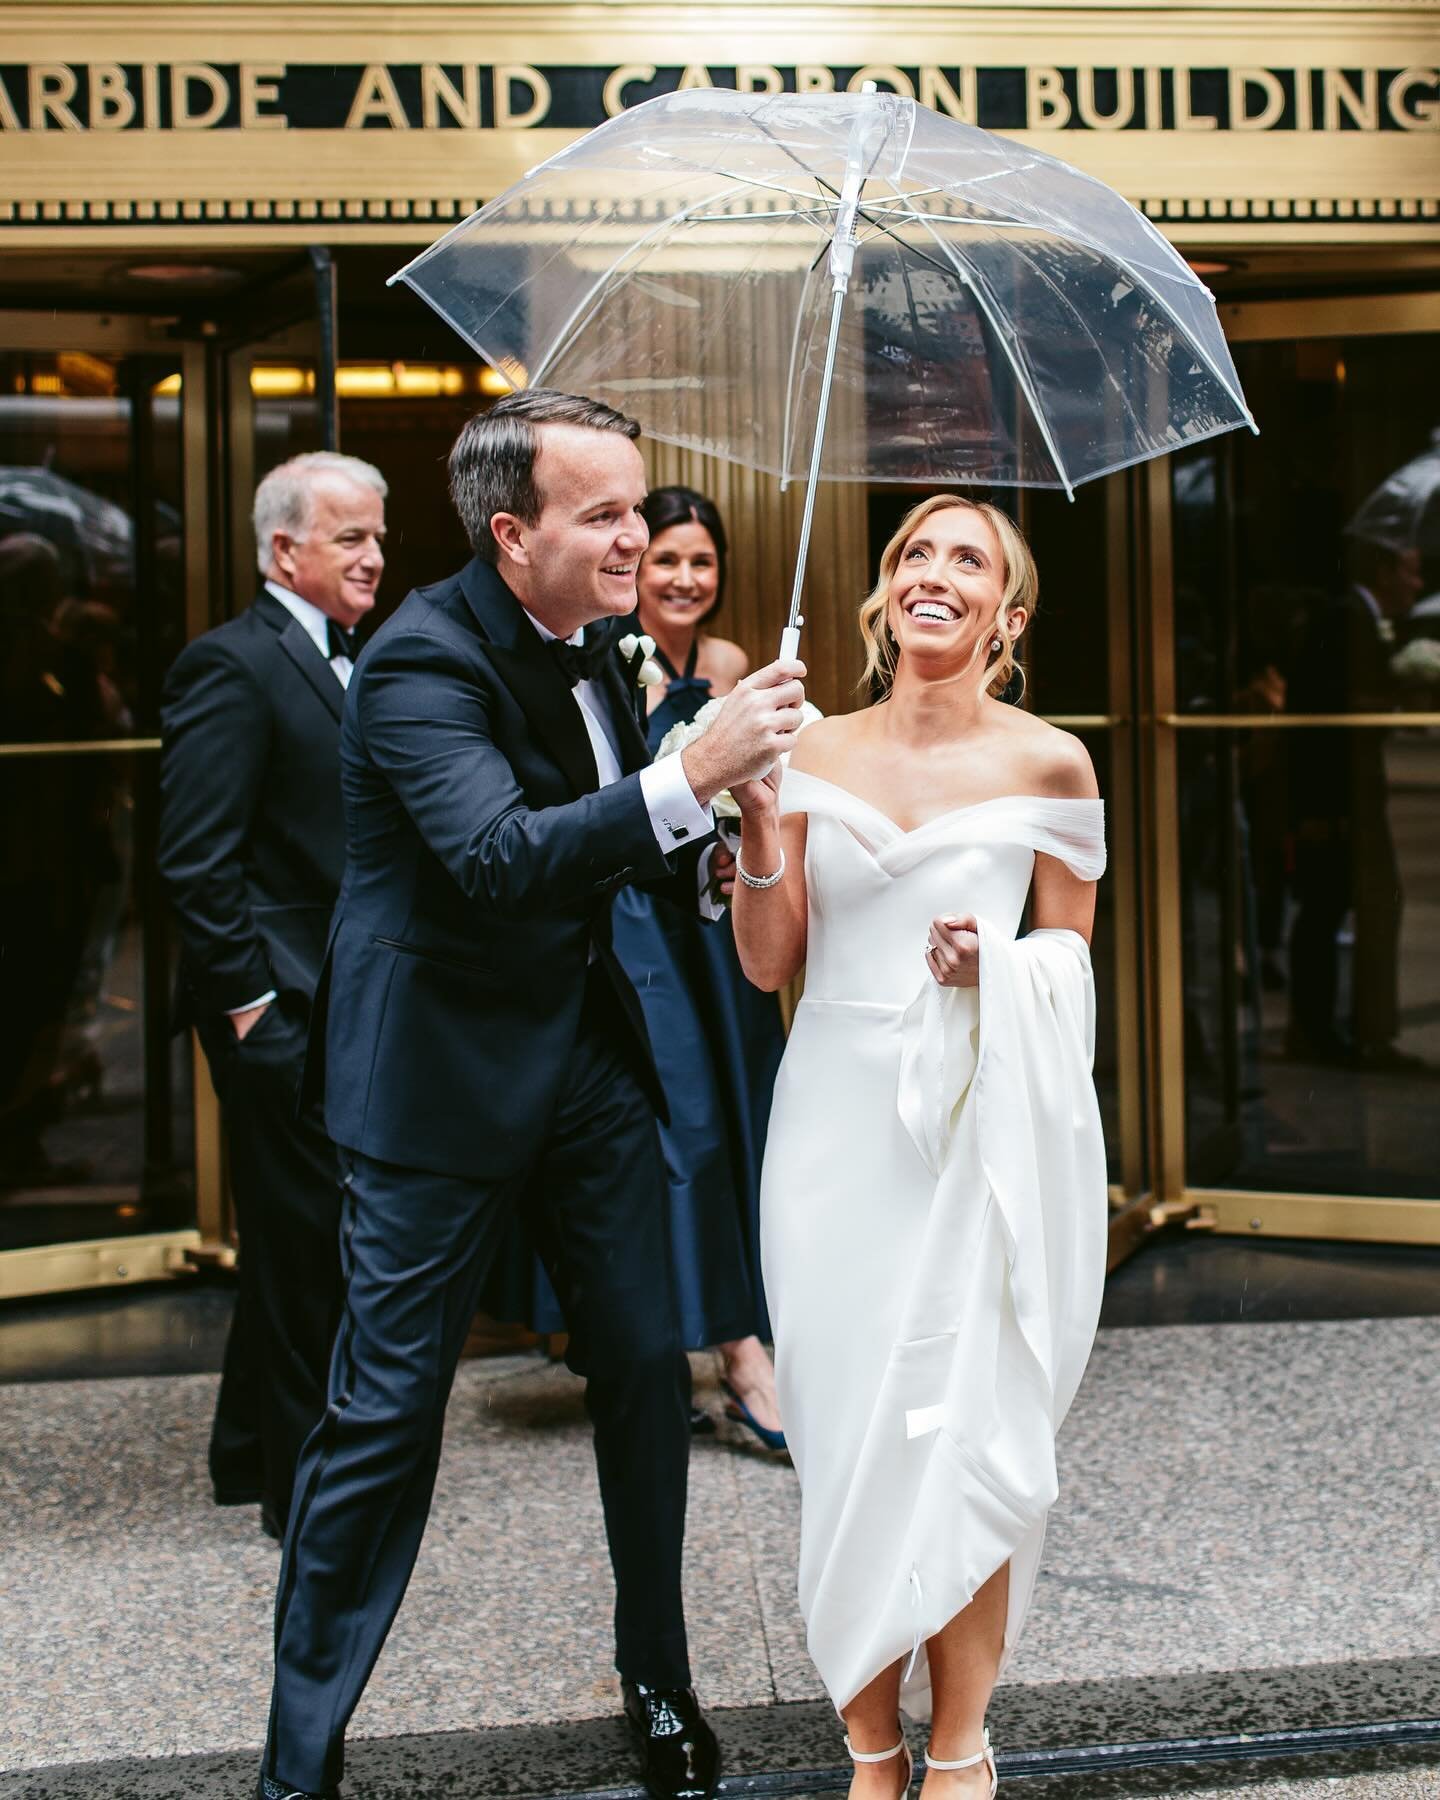 A couple raindrops couldn&rsquo;t dampen the love on this special day! Capturing cute + classic umbrella photos like these makes us appreciate the rain a little bit more ☔
.
.
.
PHOTO - @nicodemcreative
VIDEO -  @oldnorthfilmco
PLANNER - @novelle.eve